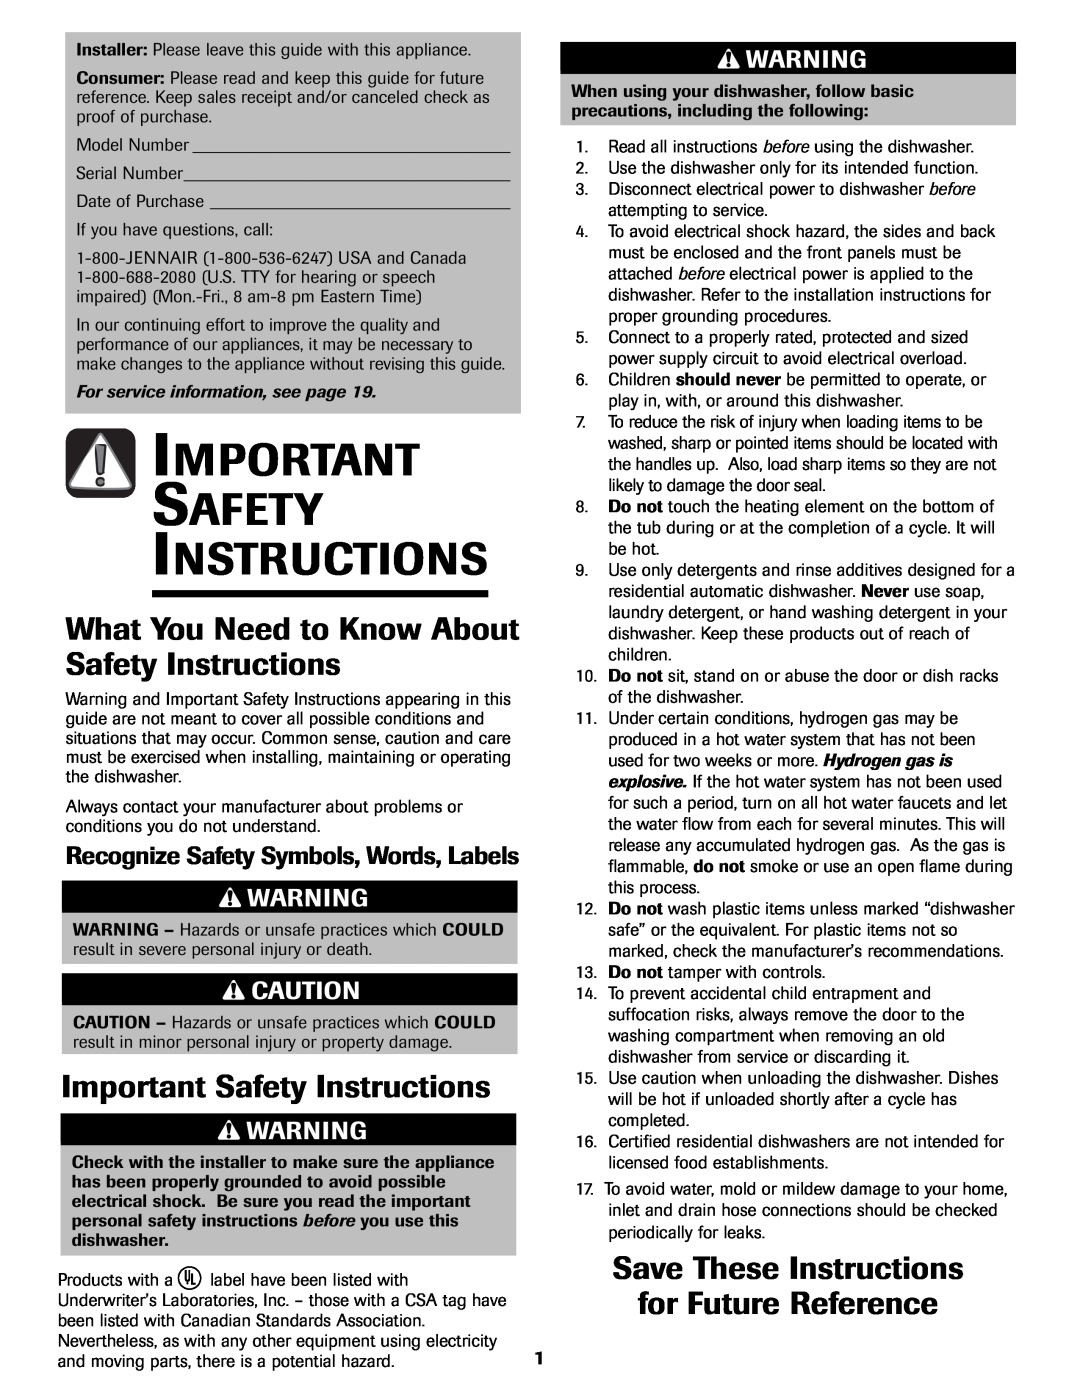 Jenn-Air JDB-5 warranty What You Need to Know About Safety Instructions, Important Safety Instructions 